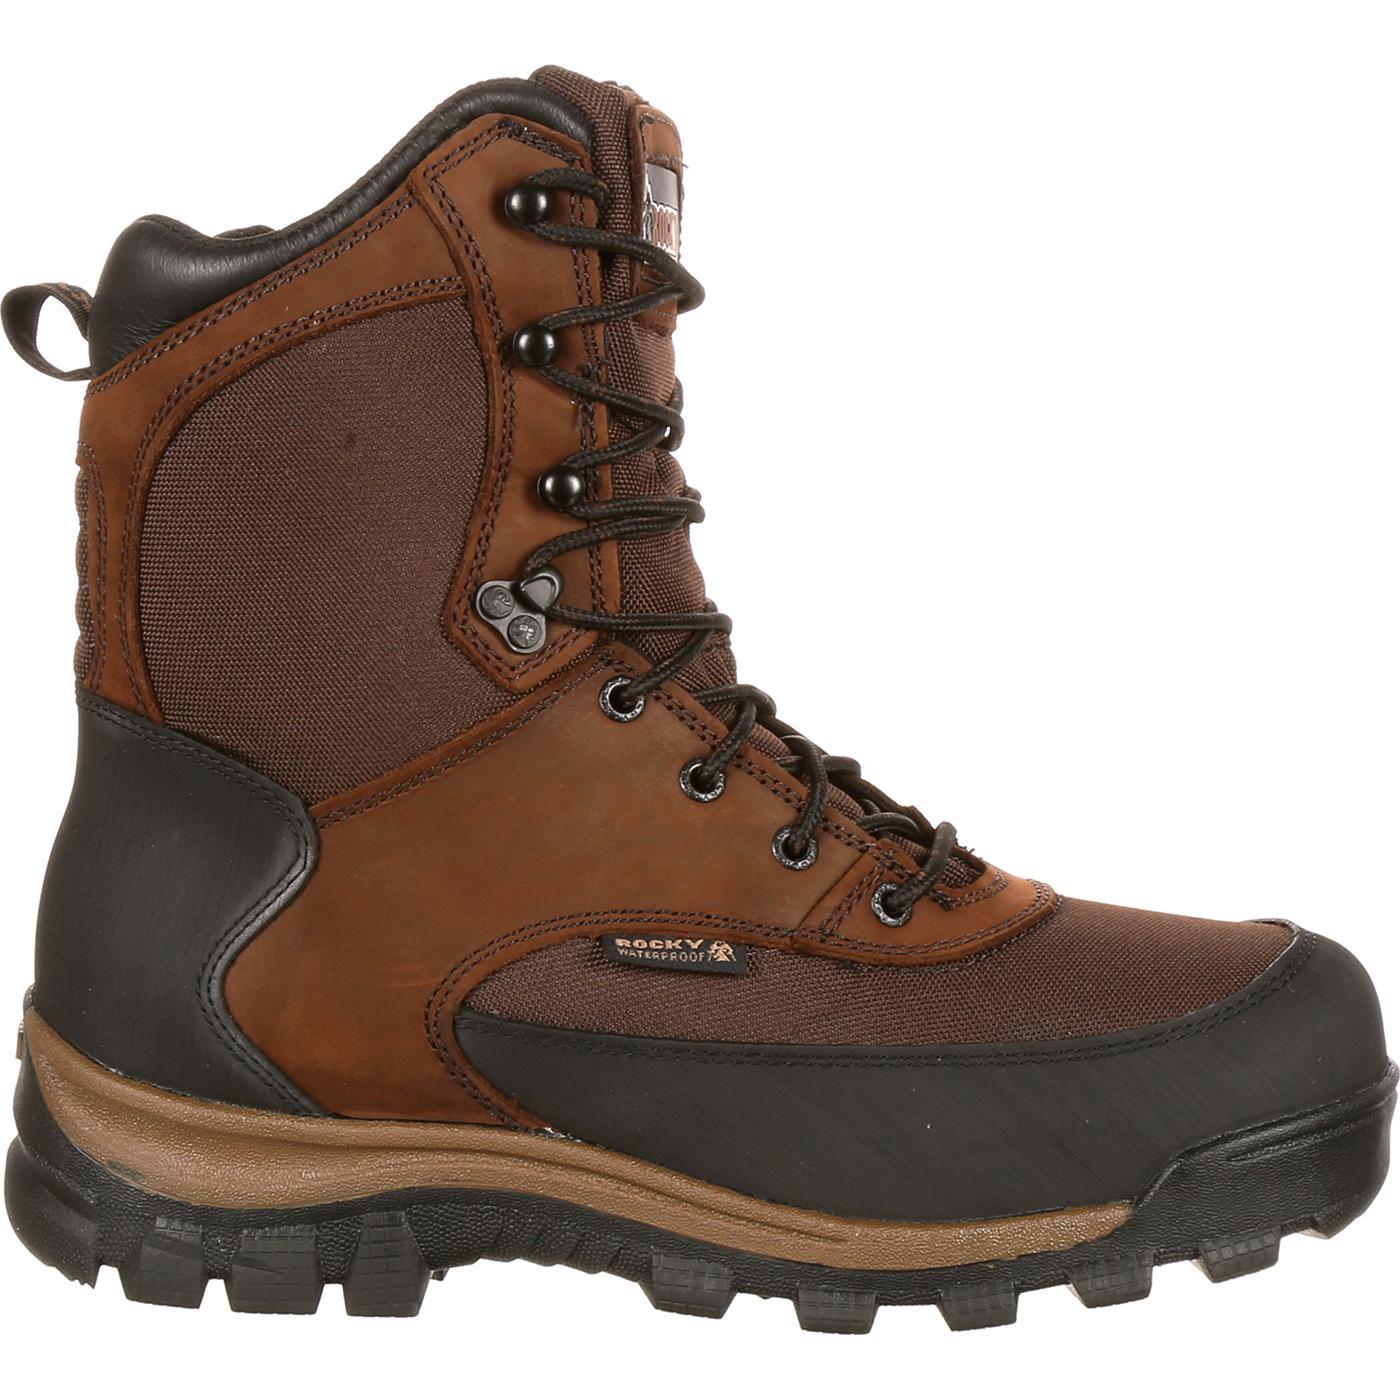 Rocky Core Waterproof 800G Insulated Outdoor Boot - Flyclothing LLC